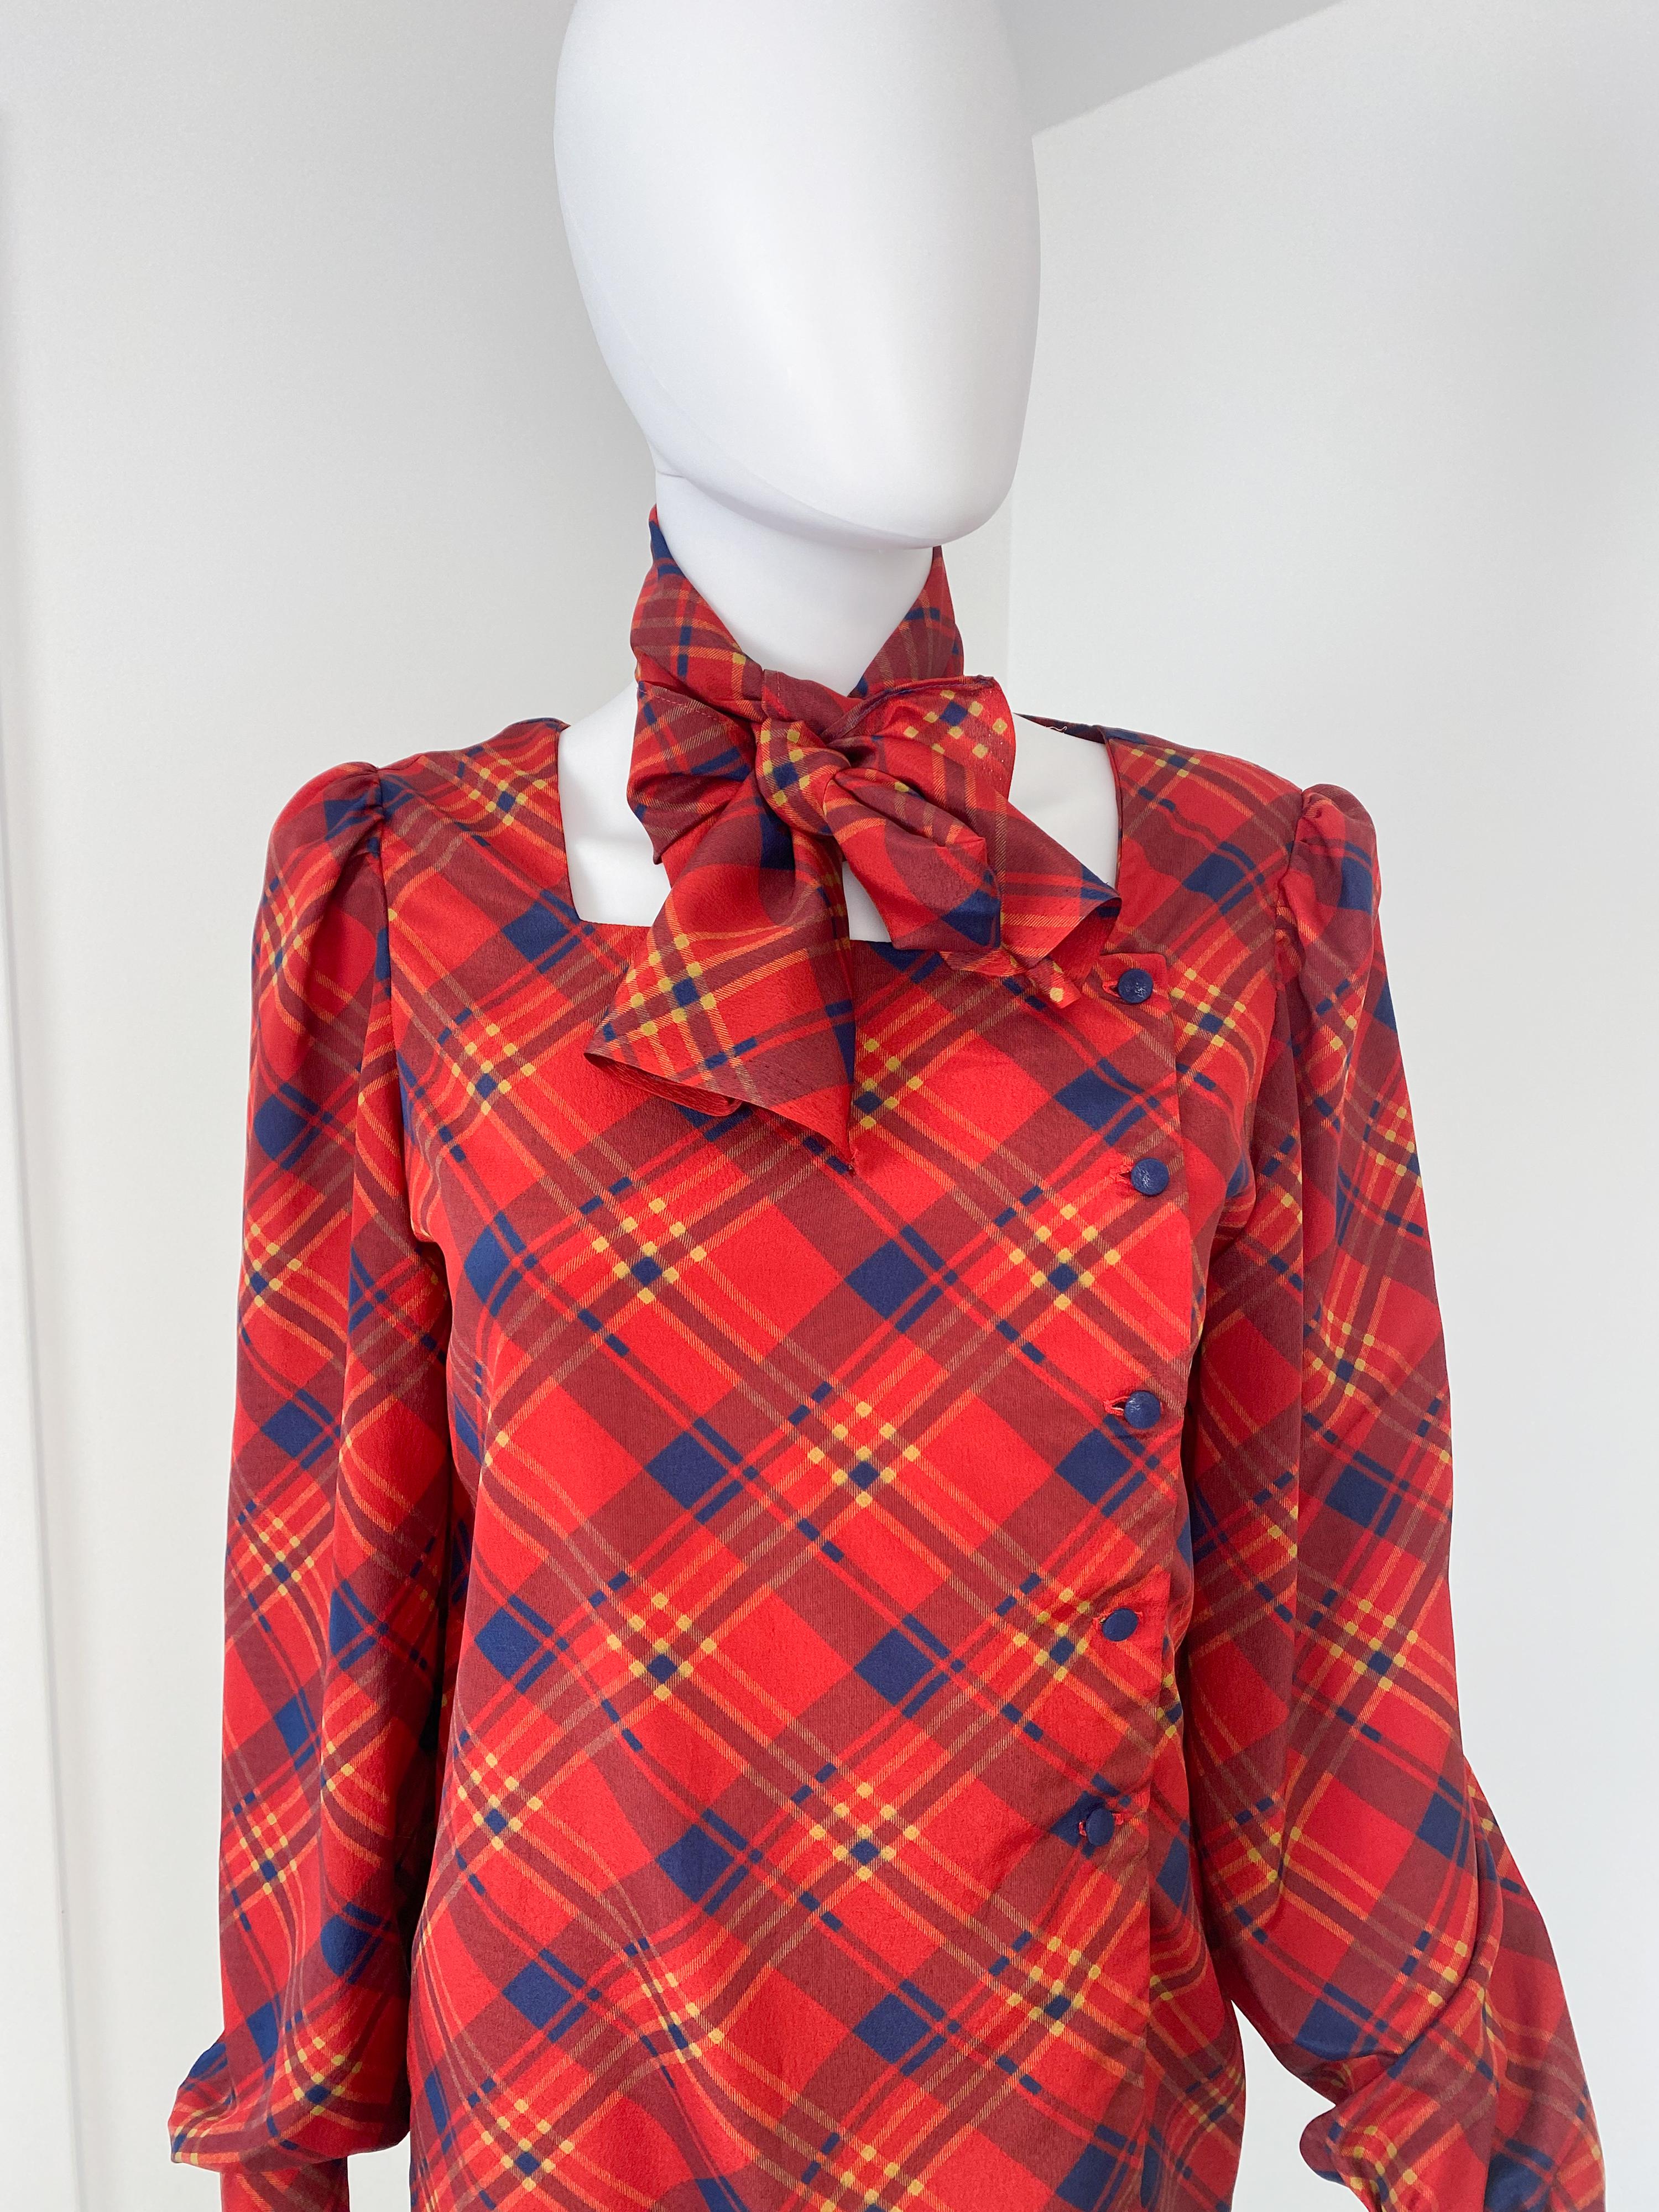 Vintage 1980s Silky Polyester Blouse Top Red and Blue Tartan Size 6/8 For Sale 3